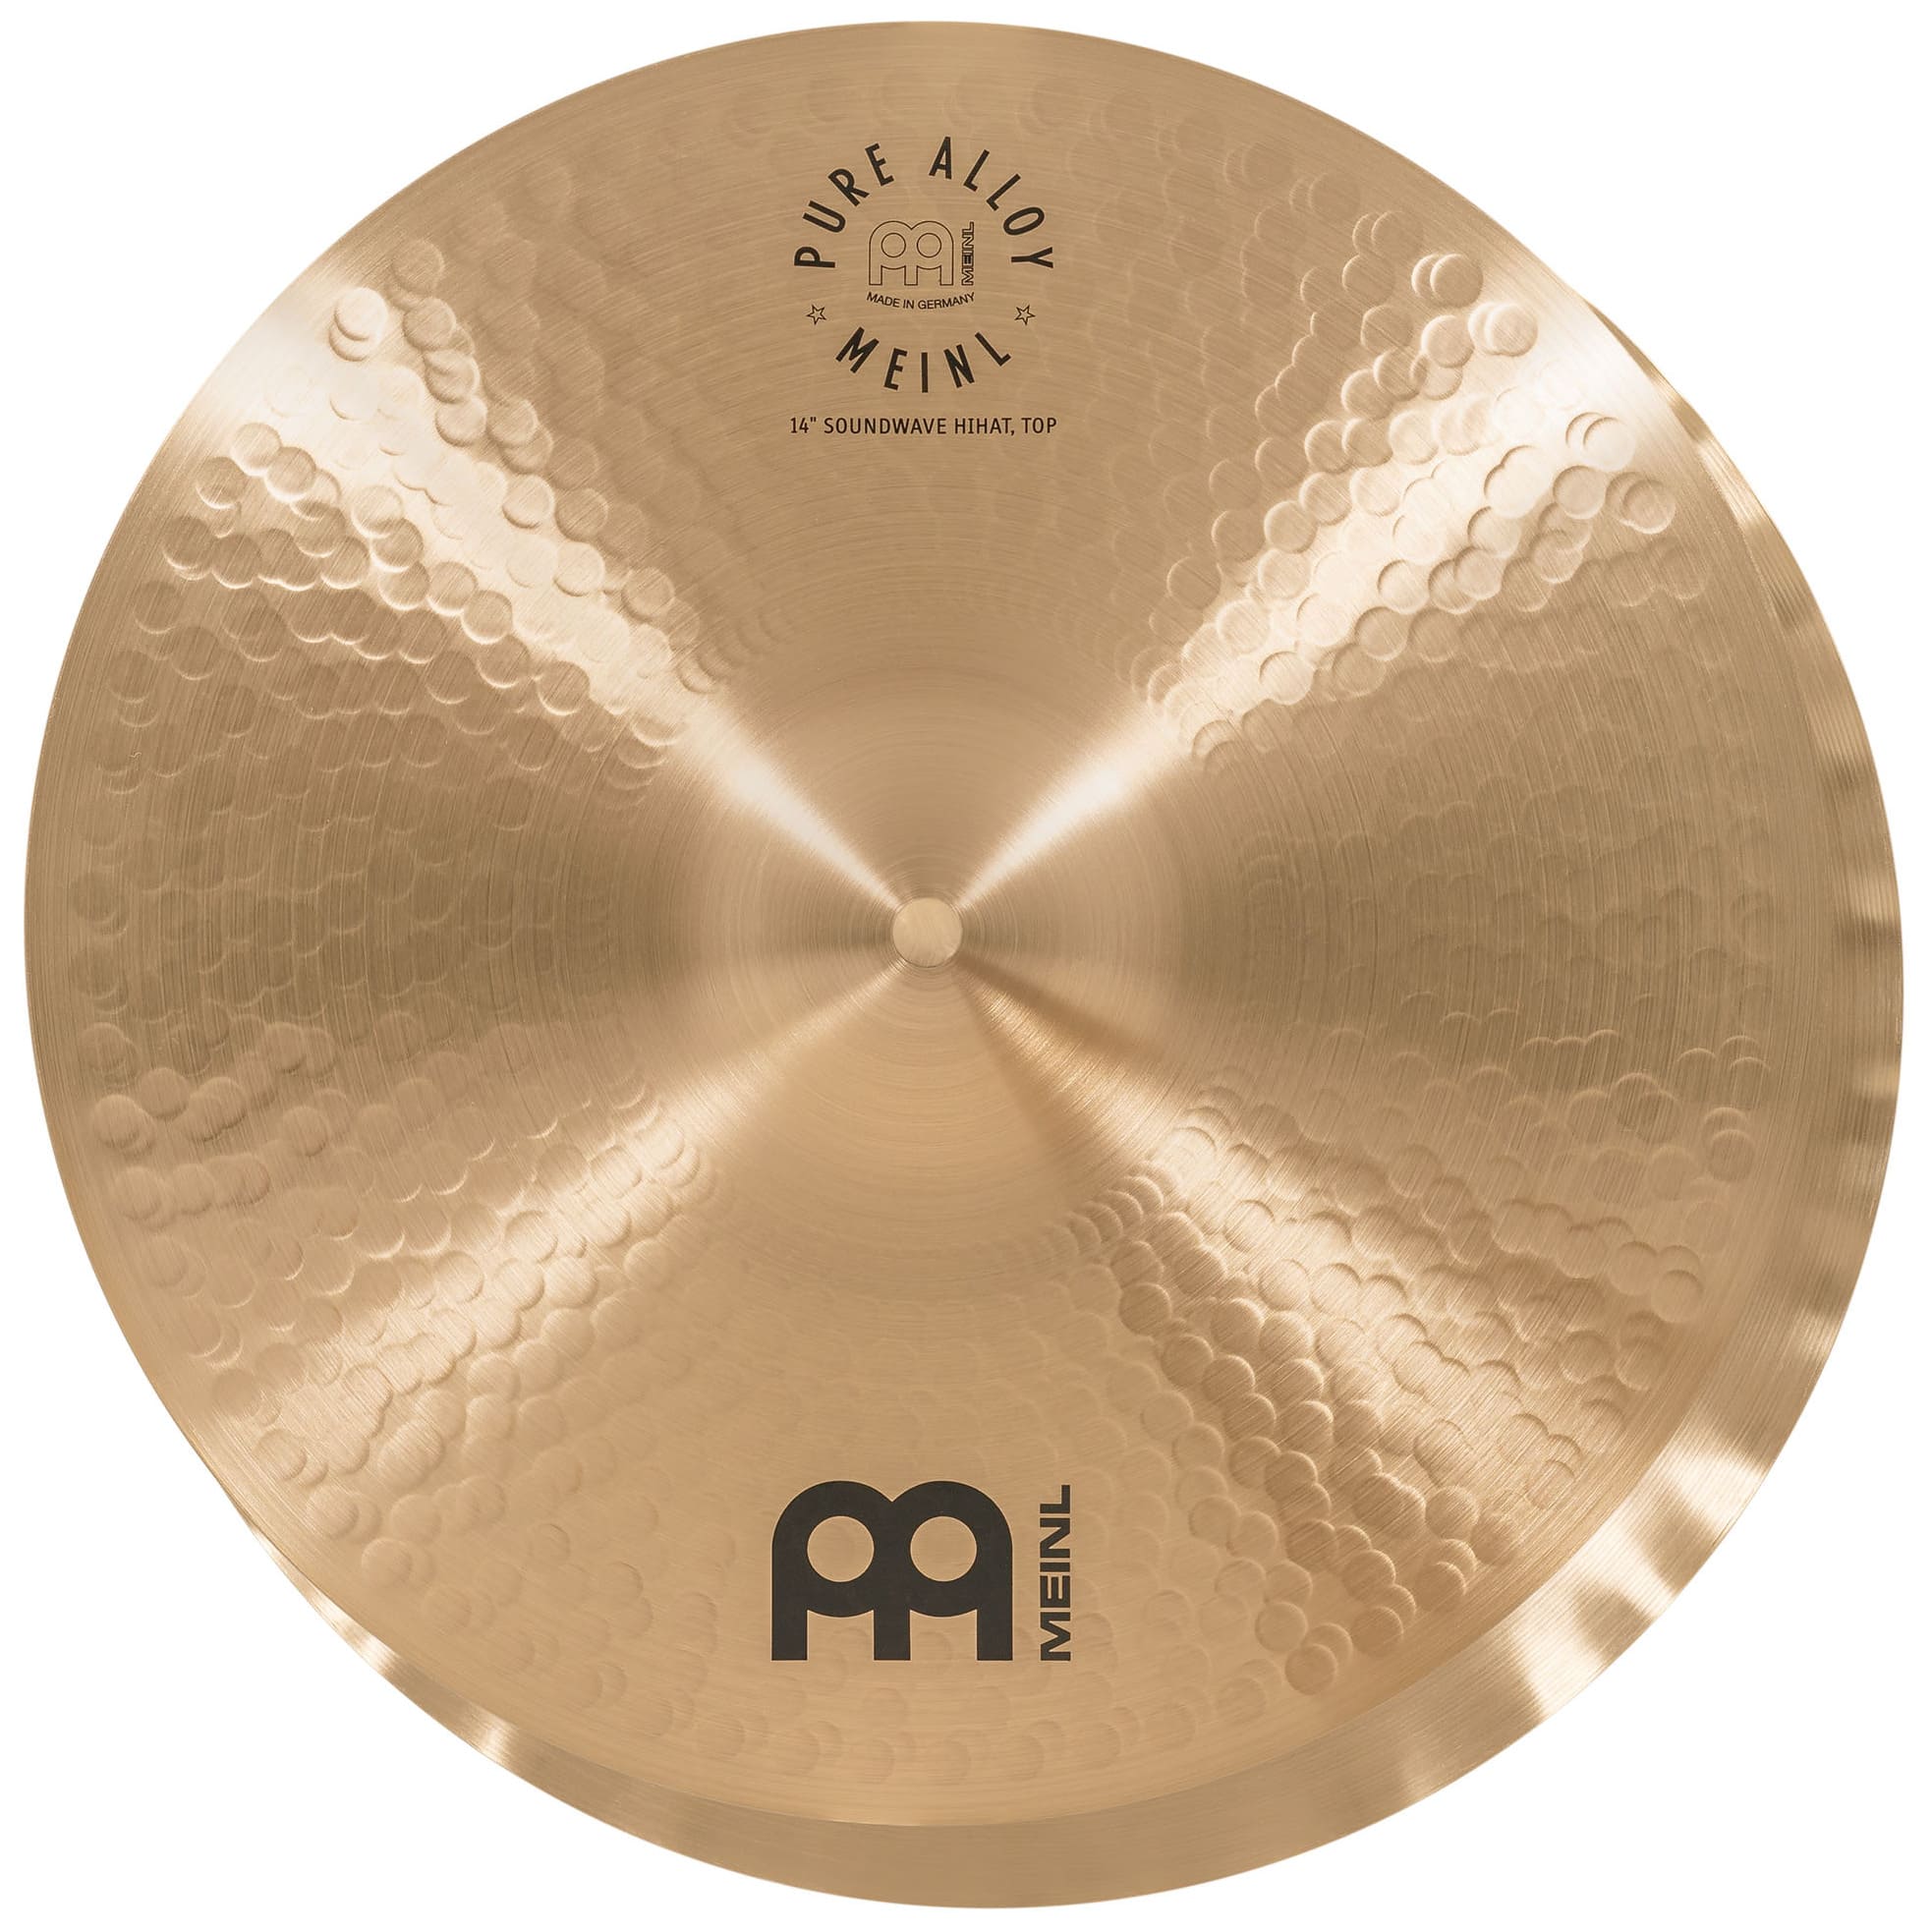 Meinl Cymbals PA14SWH - 14" Pure Alloy Soundwave Hihat